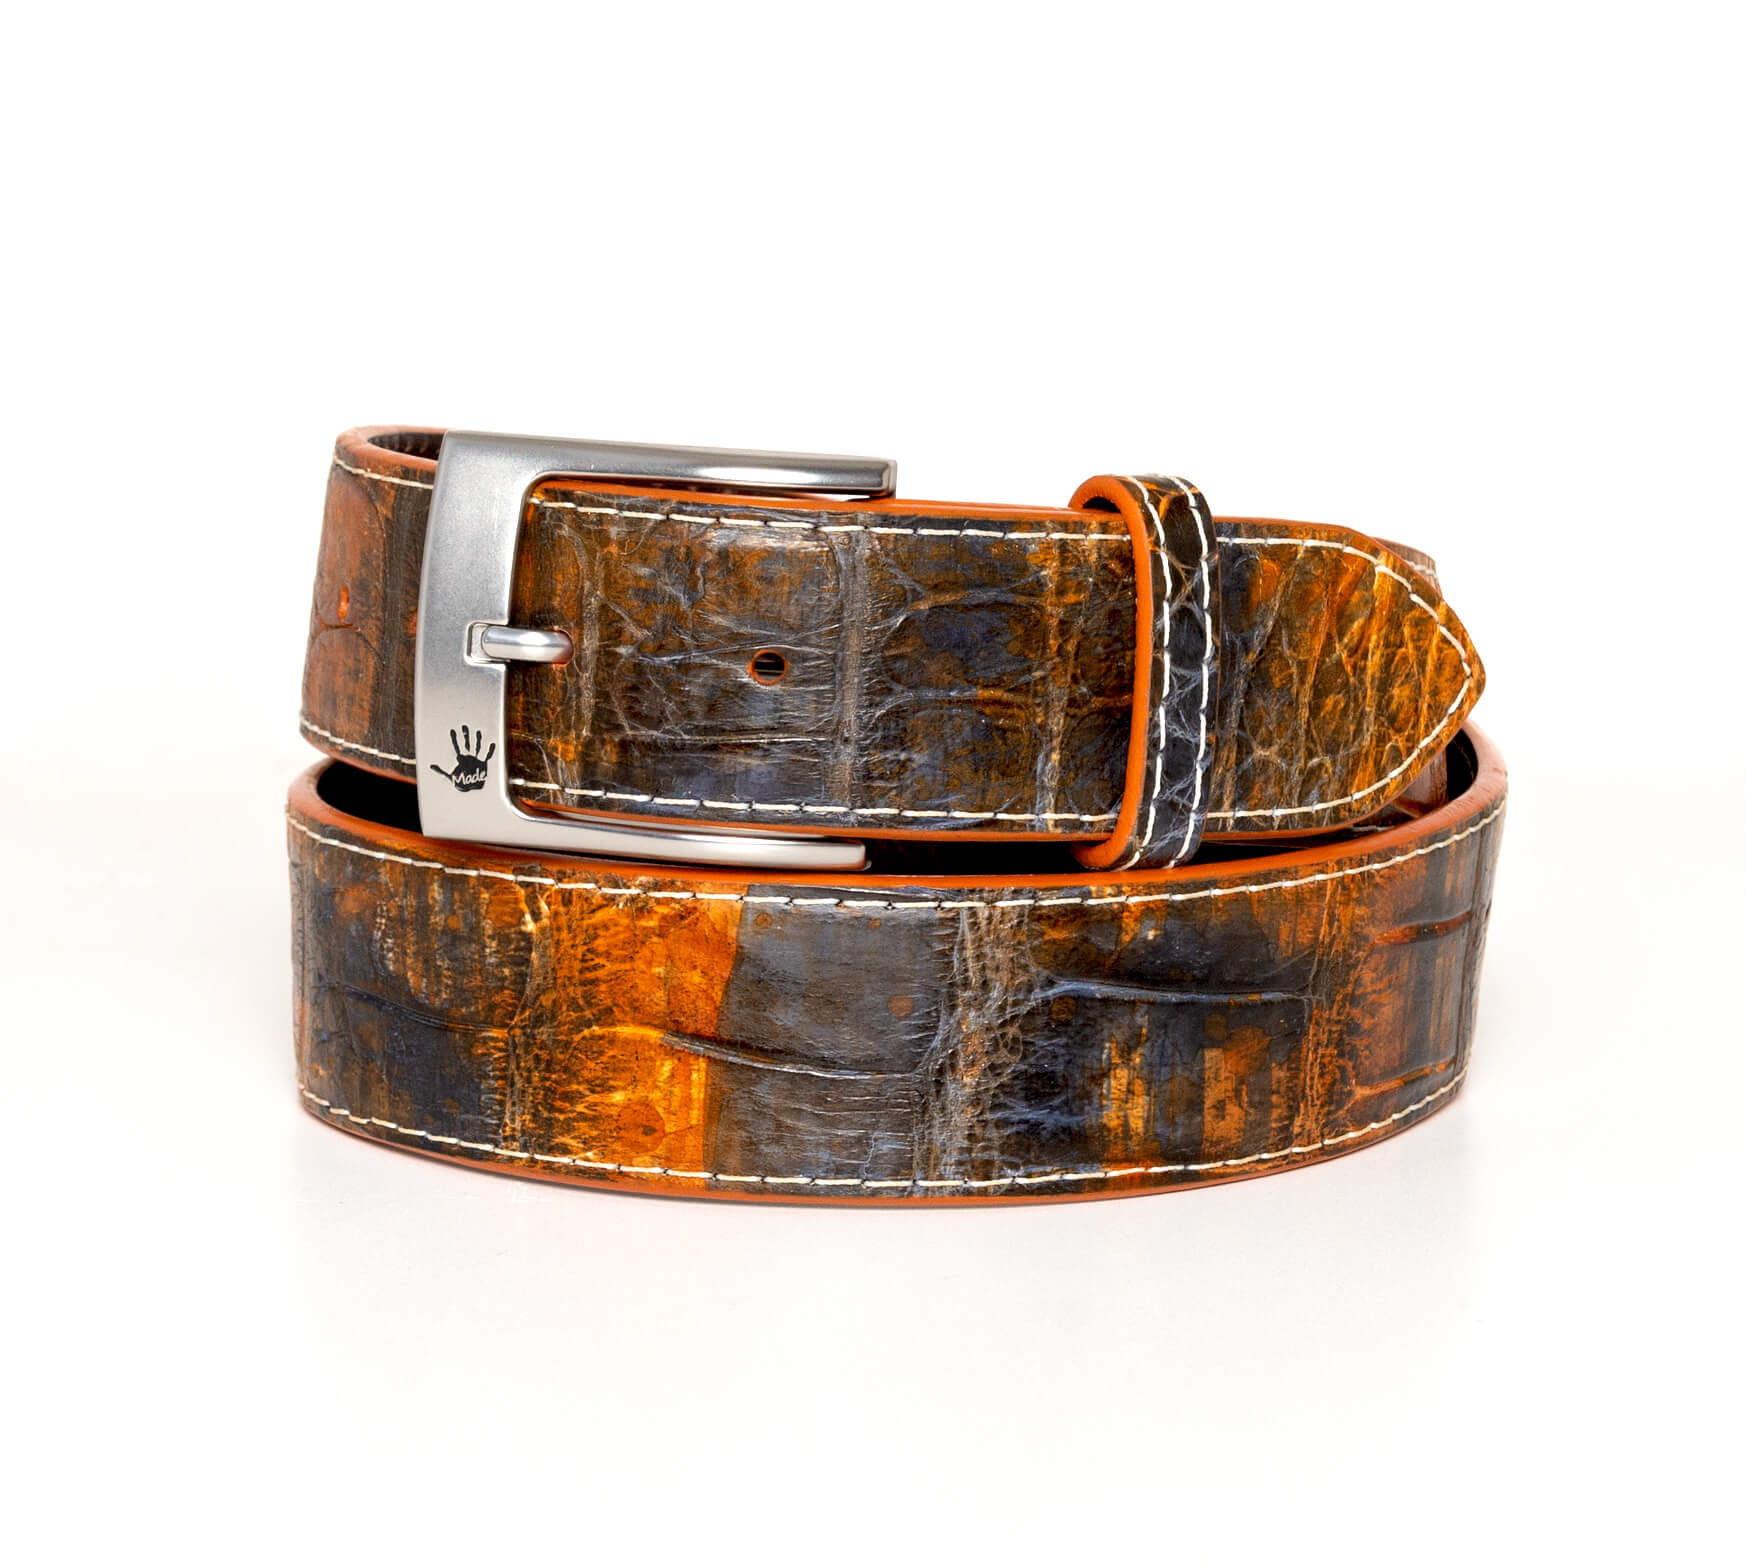 Gibbons Handmade - Hand-Painted Belts & Accessories | 